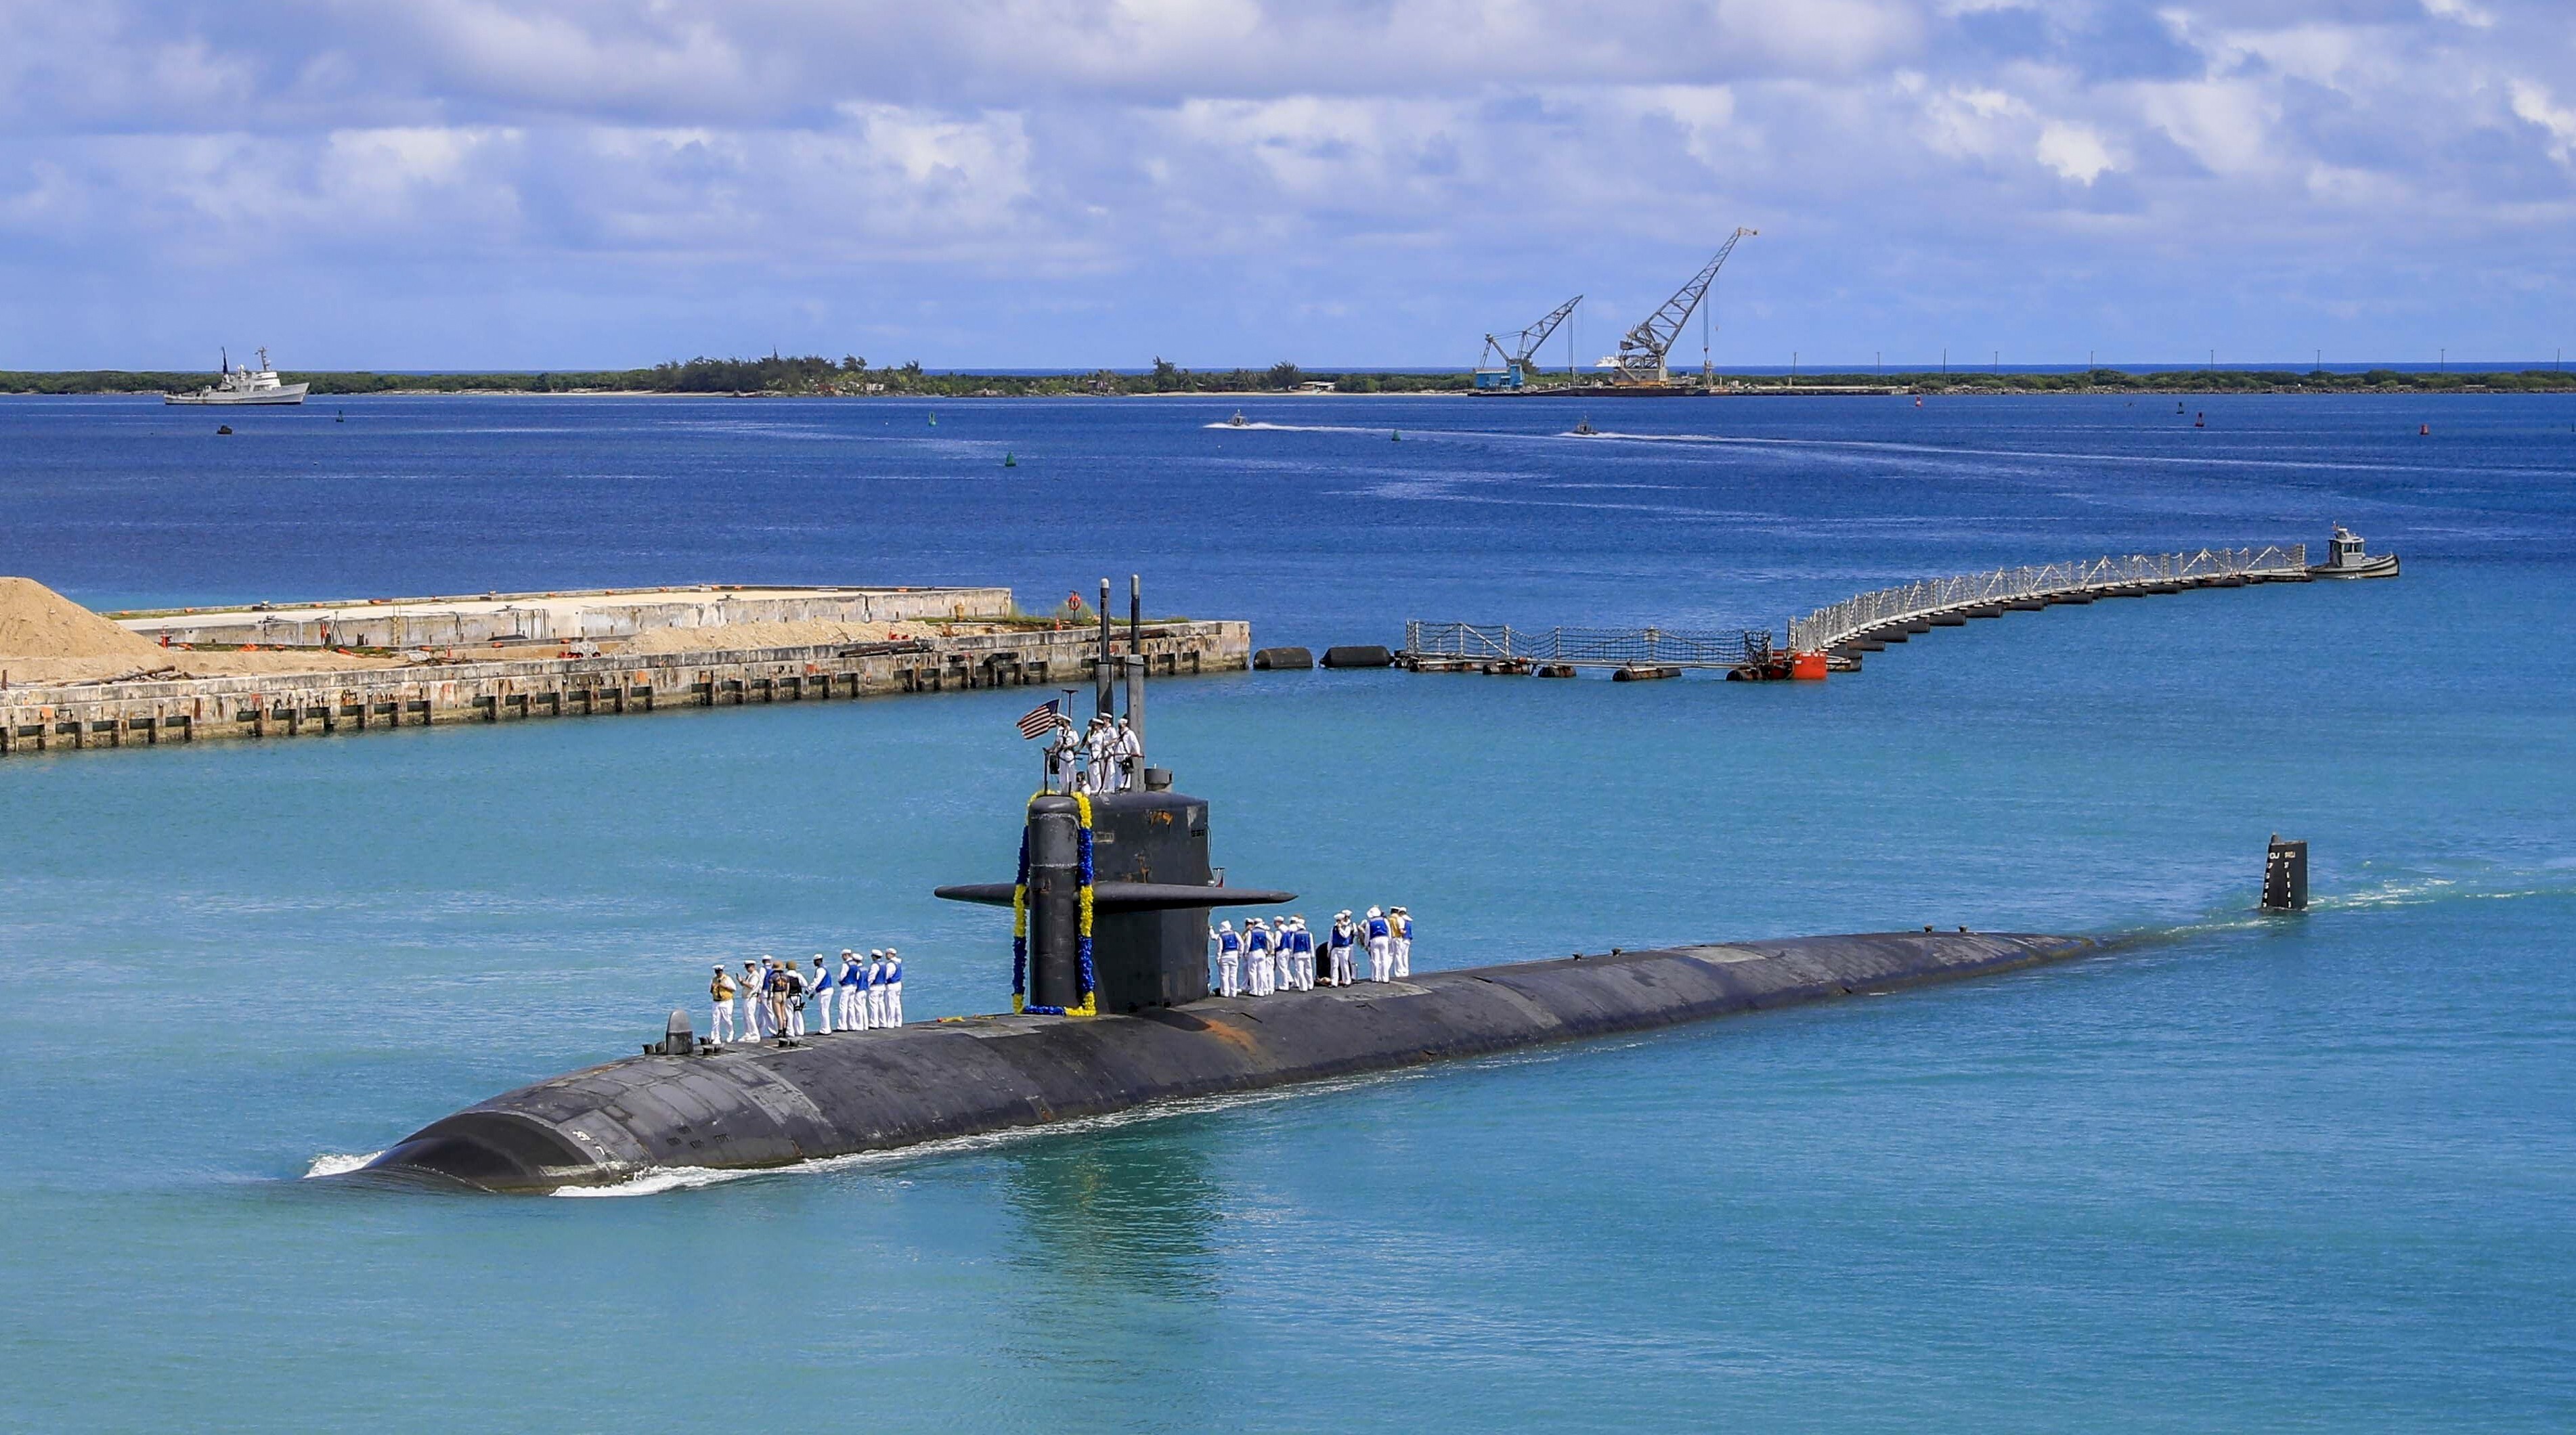 Australia will acquire US nuclear-powered submarines, like this US Navy one pictured in Guam, as part of a new security alliance with the US and Britain that has caused unease in Pacific Island nations. Photo: AP